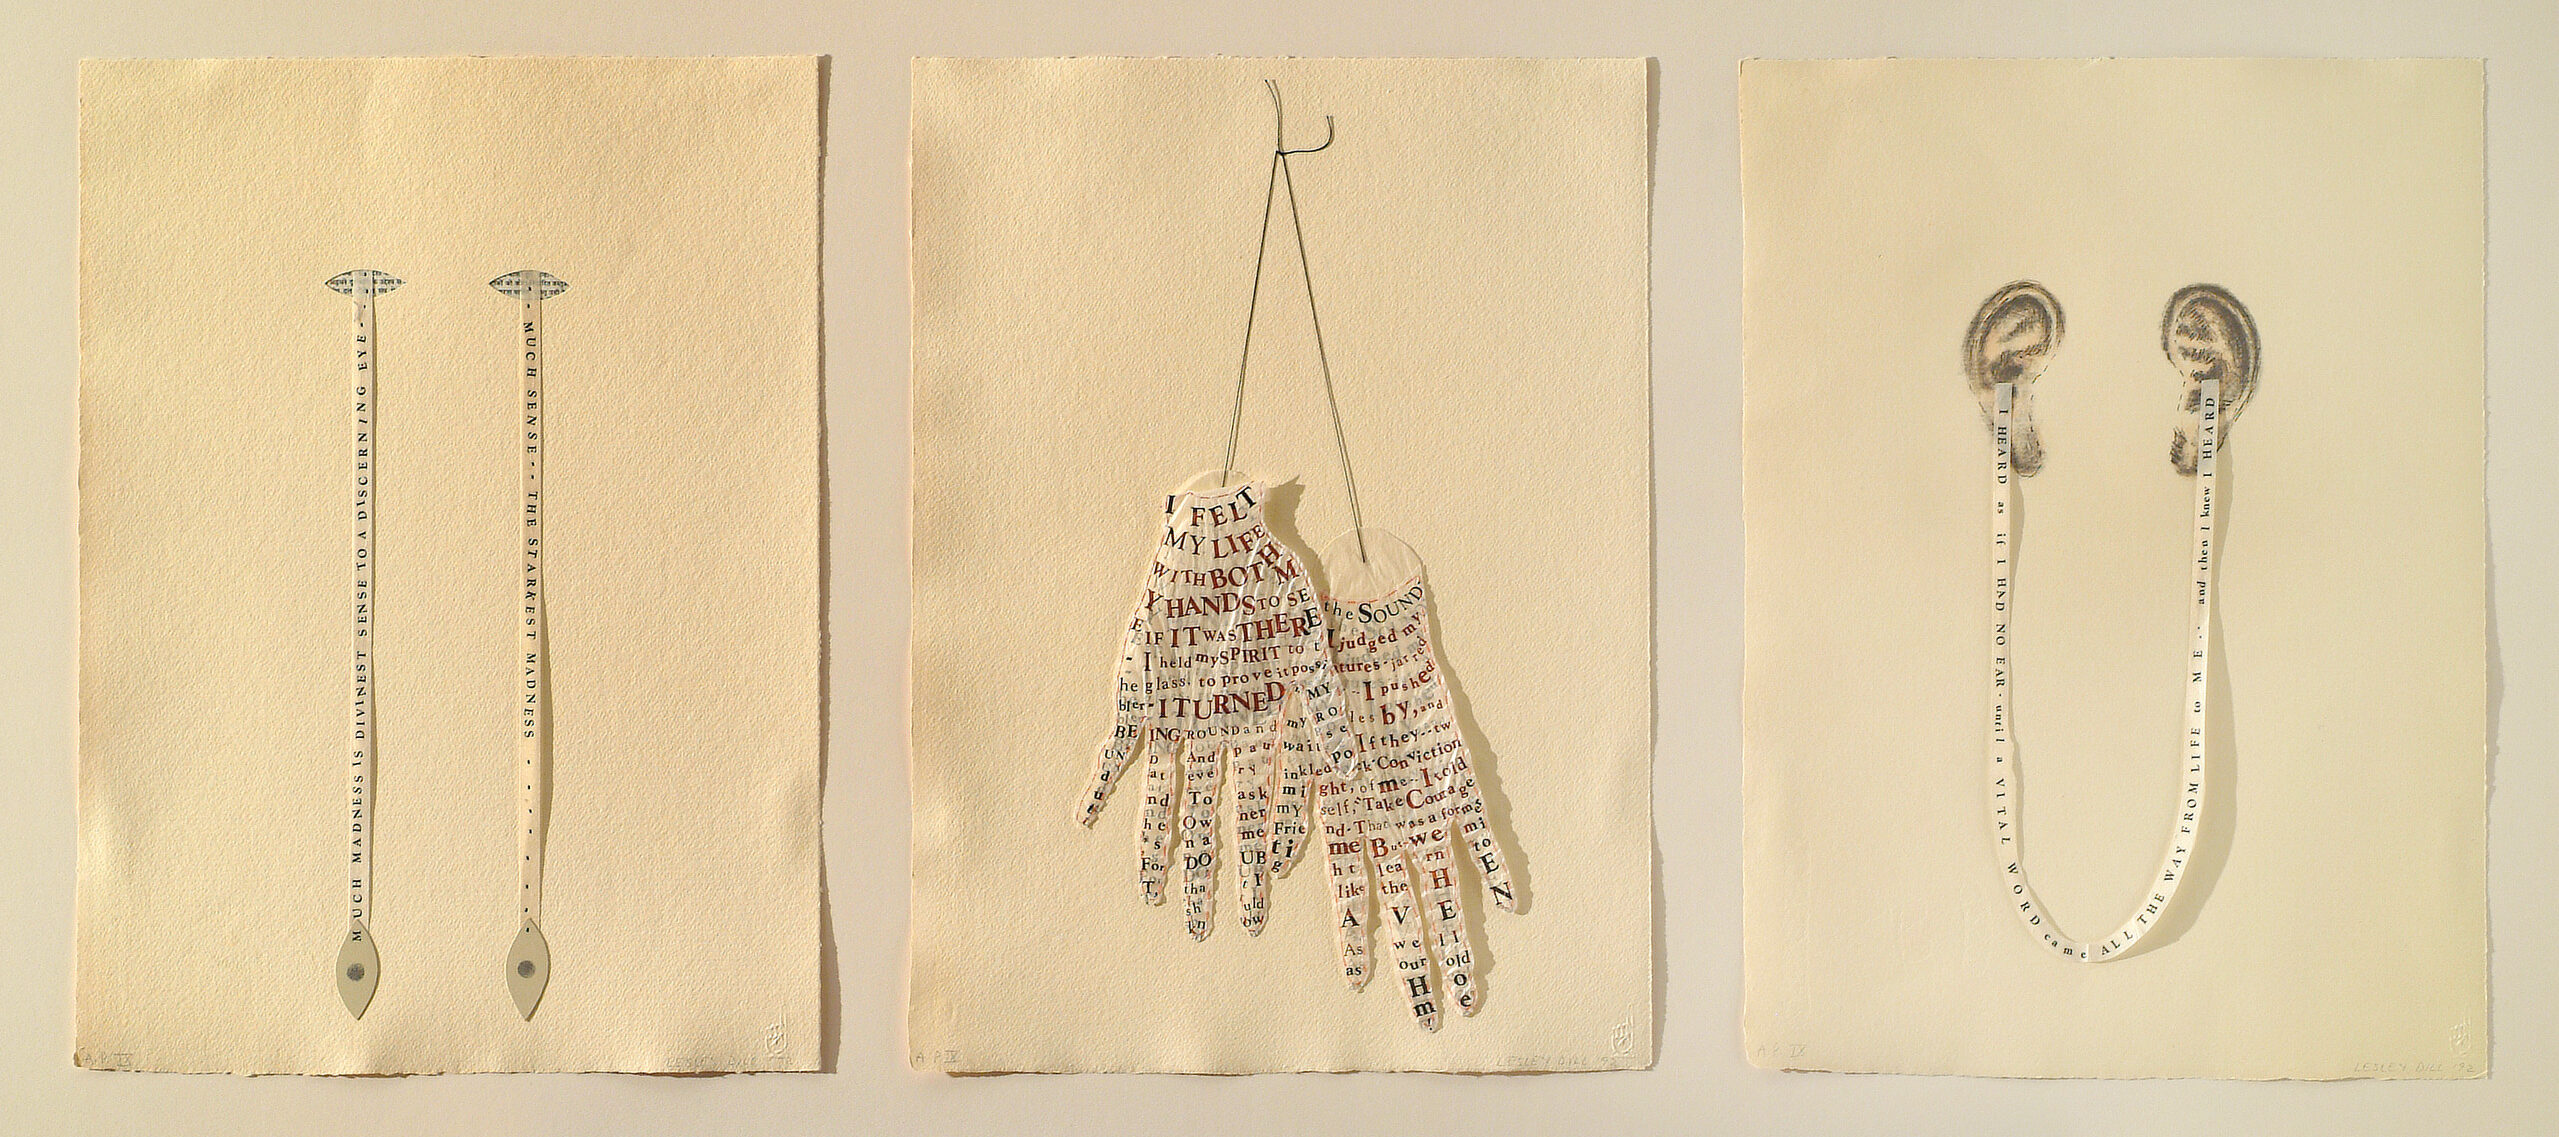 Three side-by-side works on vanilla-colored paper features eyes, hands and ears with words printed on them.